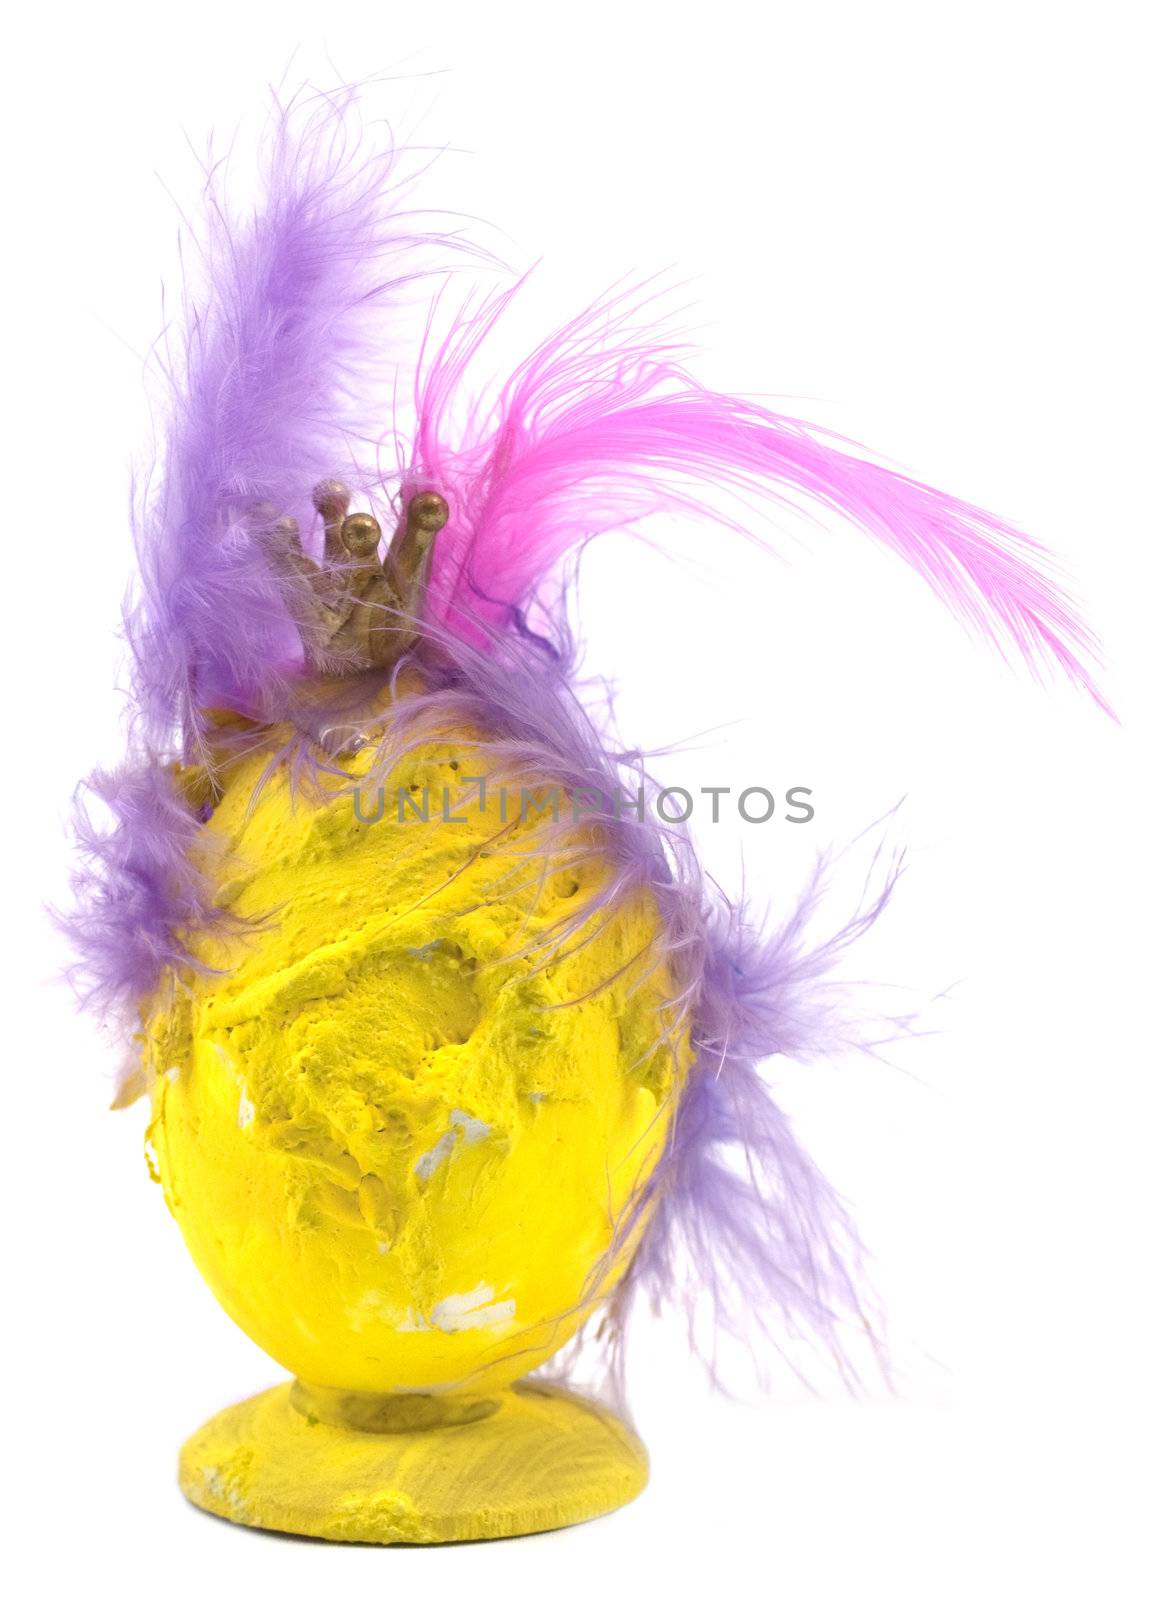 Royal easter decoration, yellow egg with feathers and gold crown